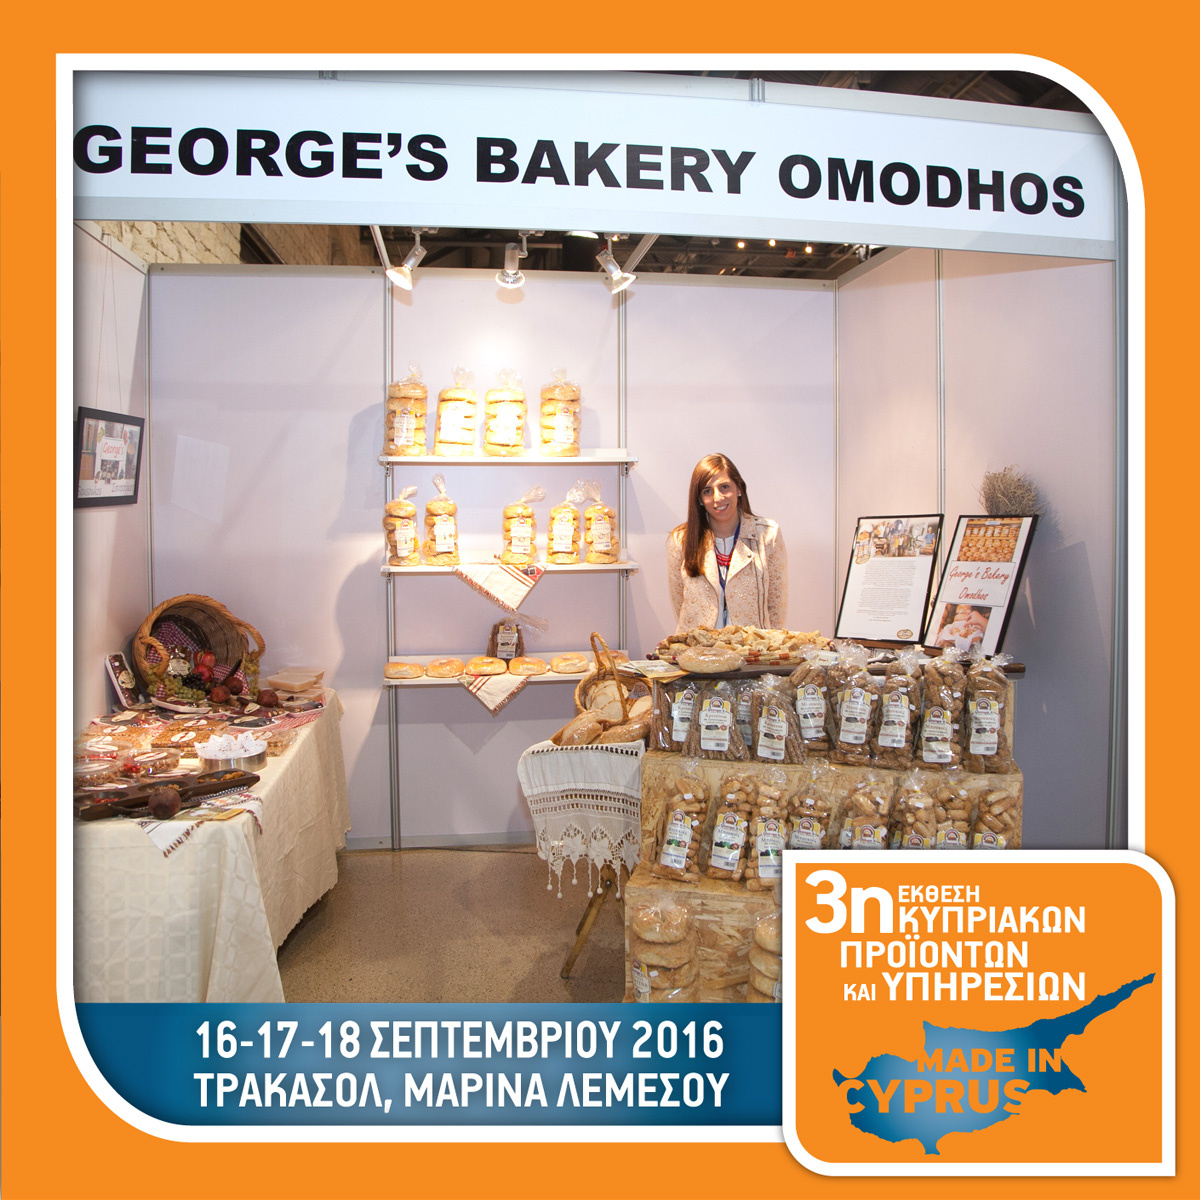 George's Bakery & Confectionery Omodhos - Booth No 5